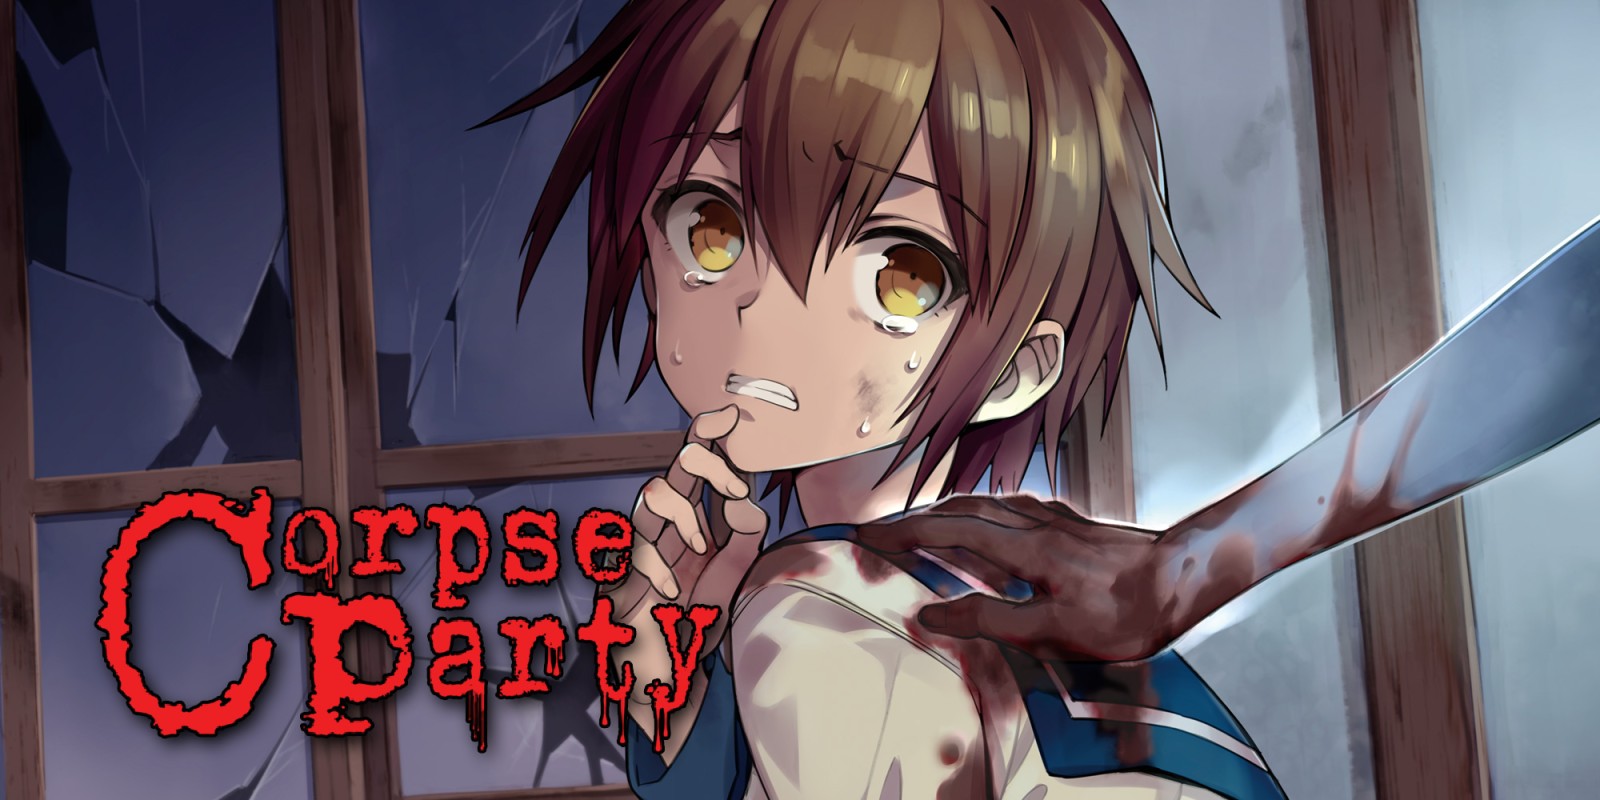 H2x1_3DSDS_CorpseParty_image1600w.jpg